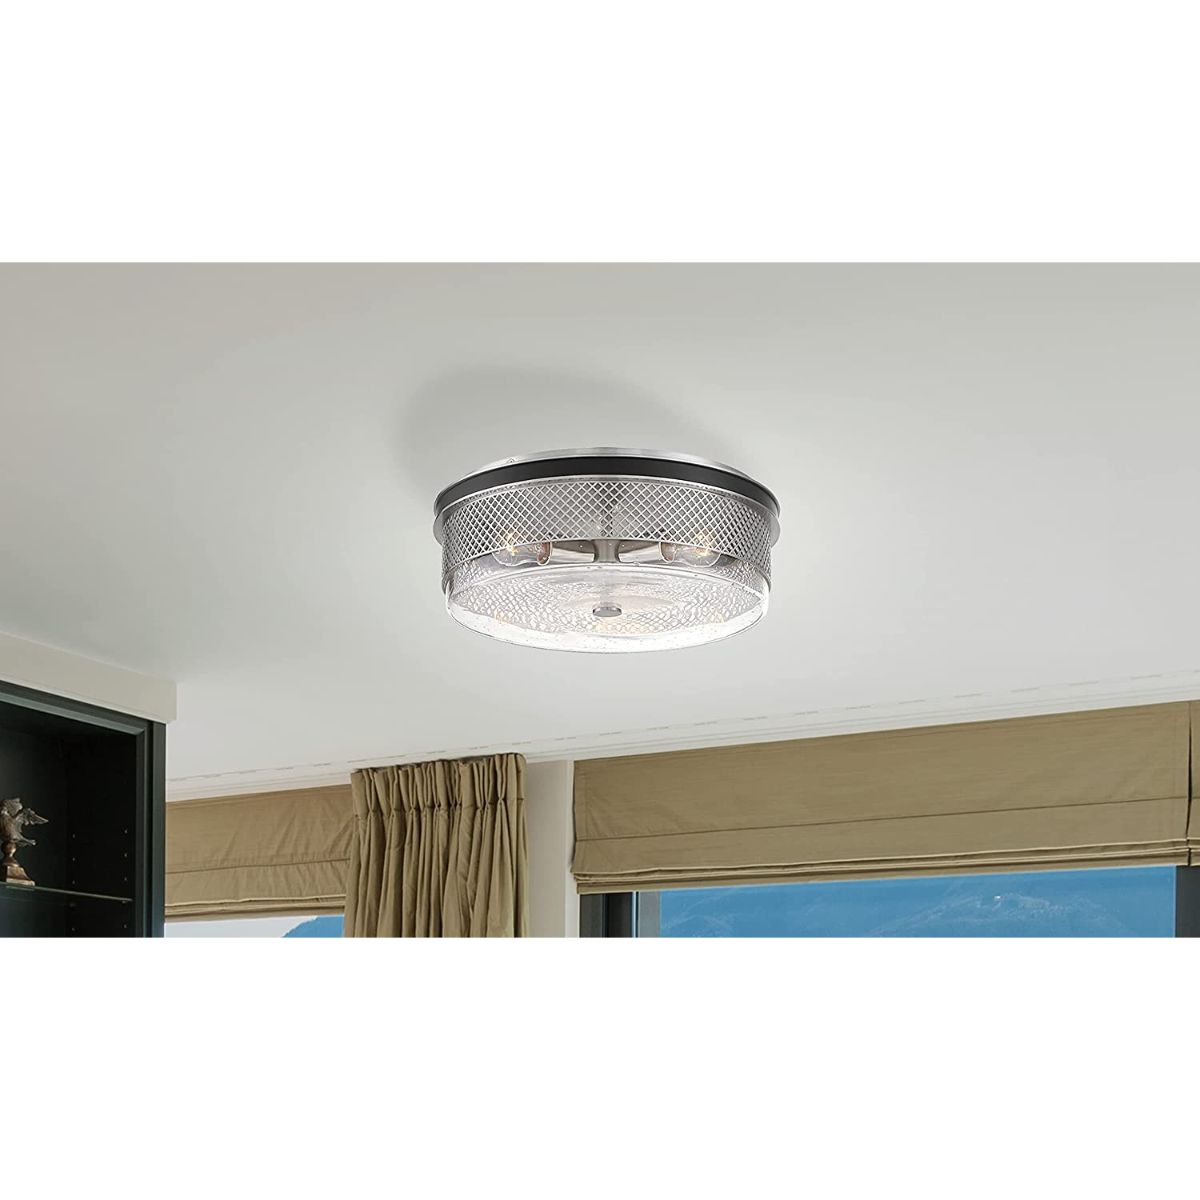 Cole's Crossing 15 in. 3 Lights Flush Mount Light Brushed Nickel Finish